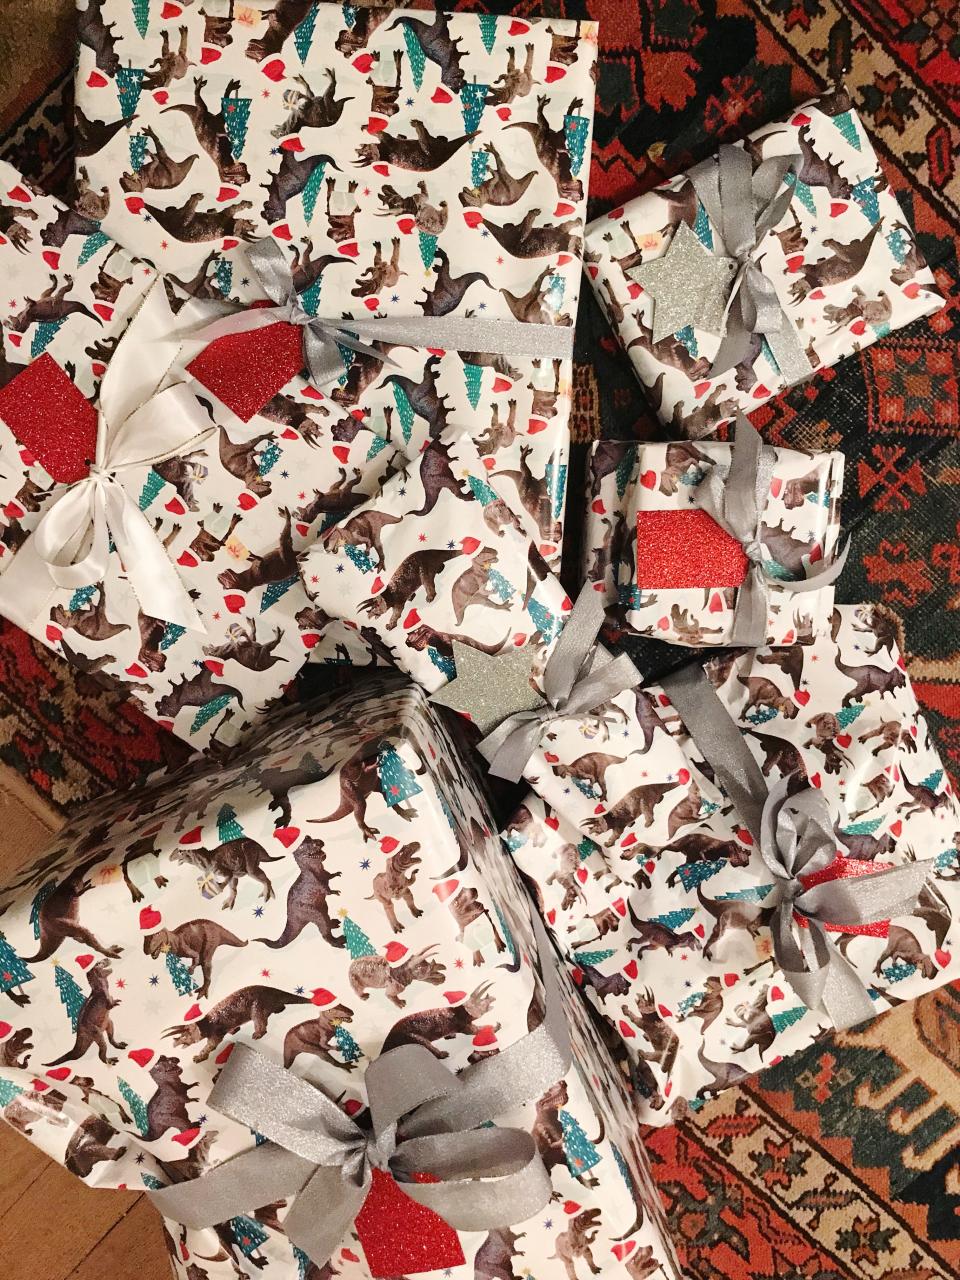 Some dinosaur wrapping for the boys this year.